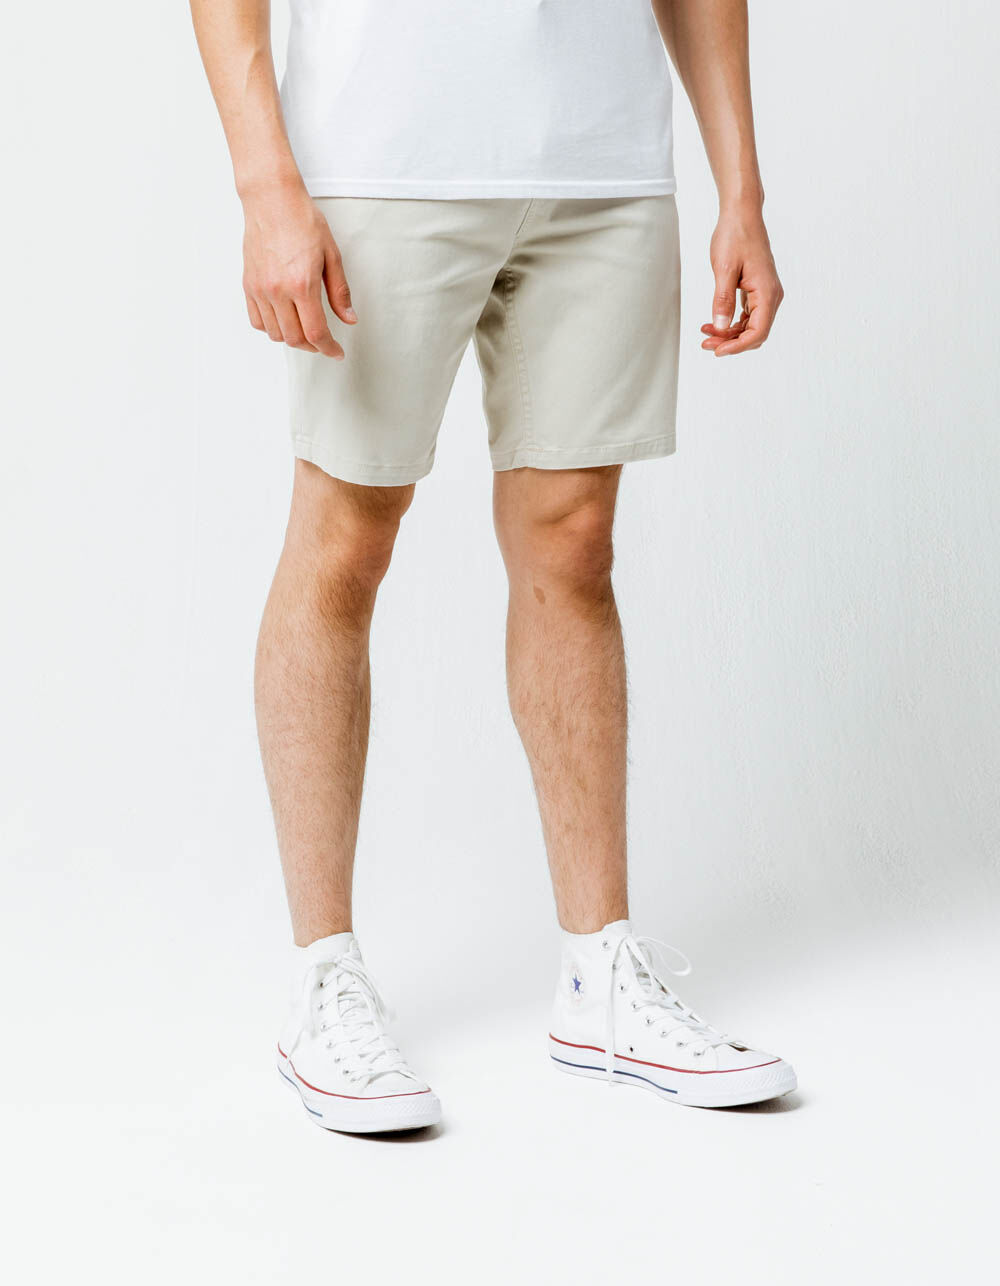 CHARLES AND A HALF Lincoln Stretch Stone Mens Shorts - STONE | Tillys